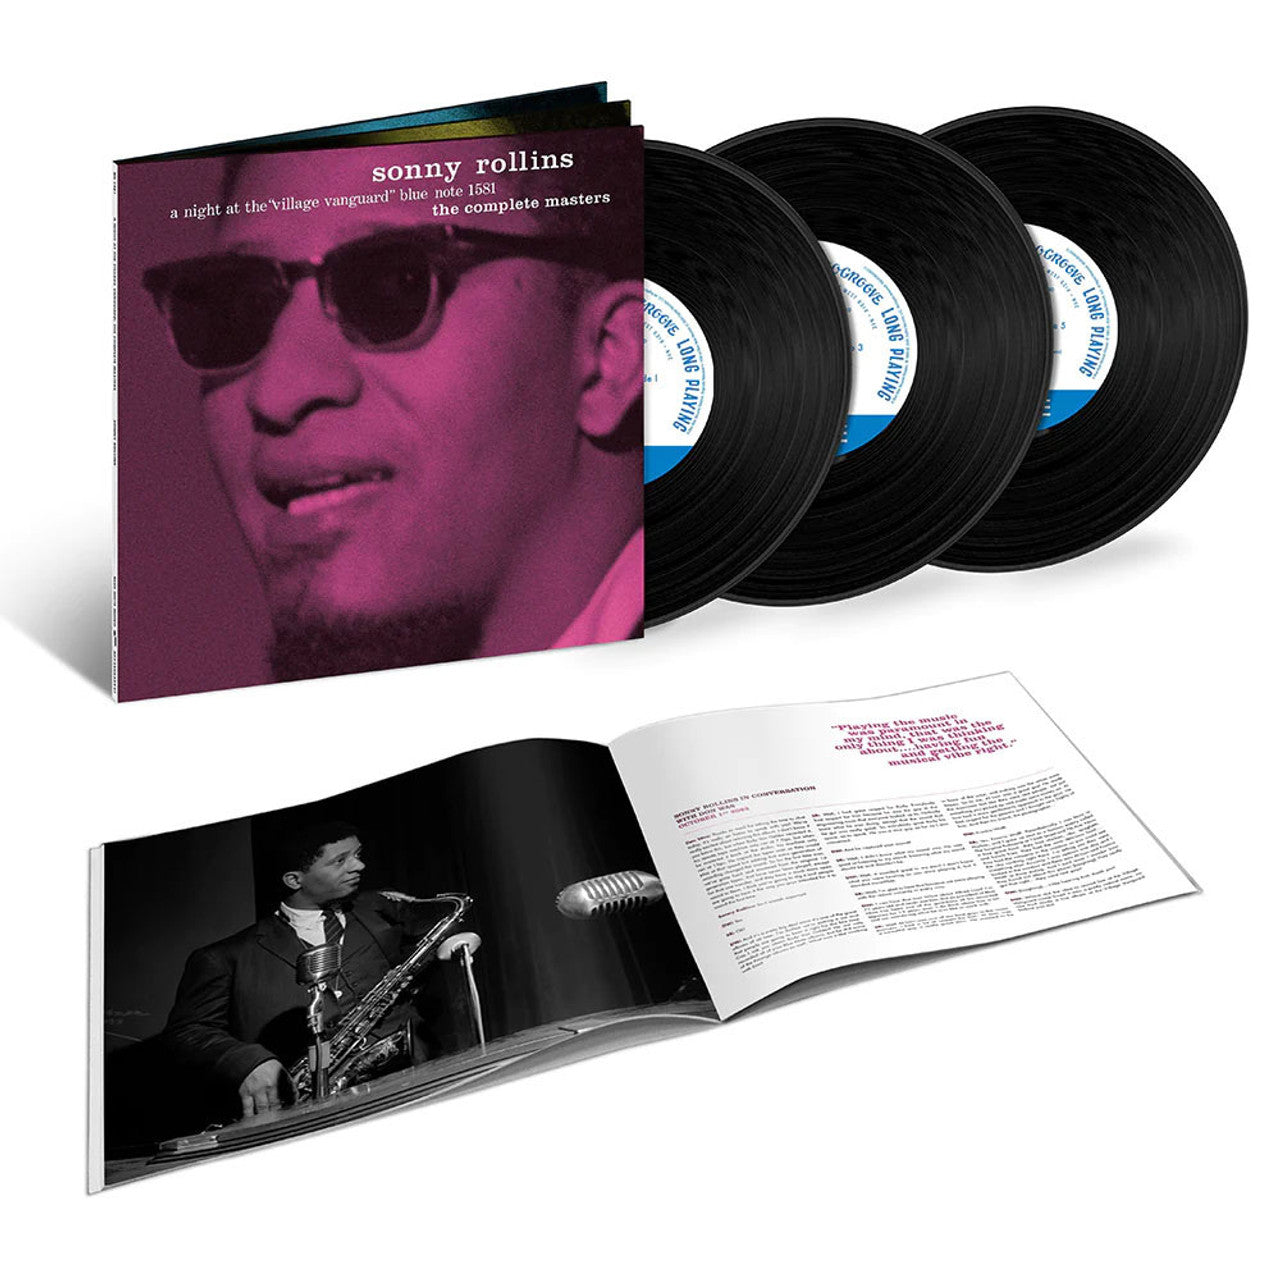 Sonny Rollins - A Night at the Village Vanguard: The Complete Masters - Tone Poet Series 3x LP